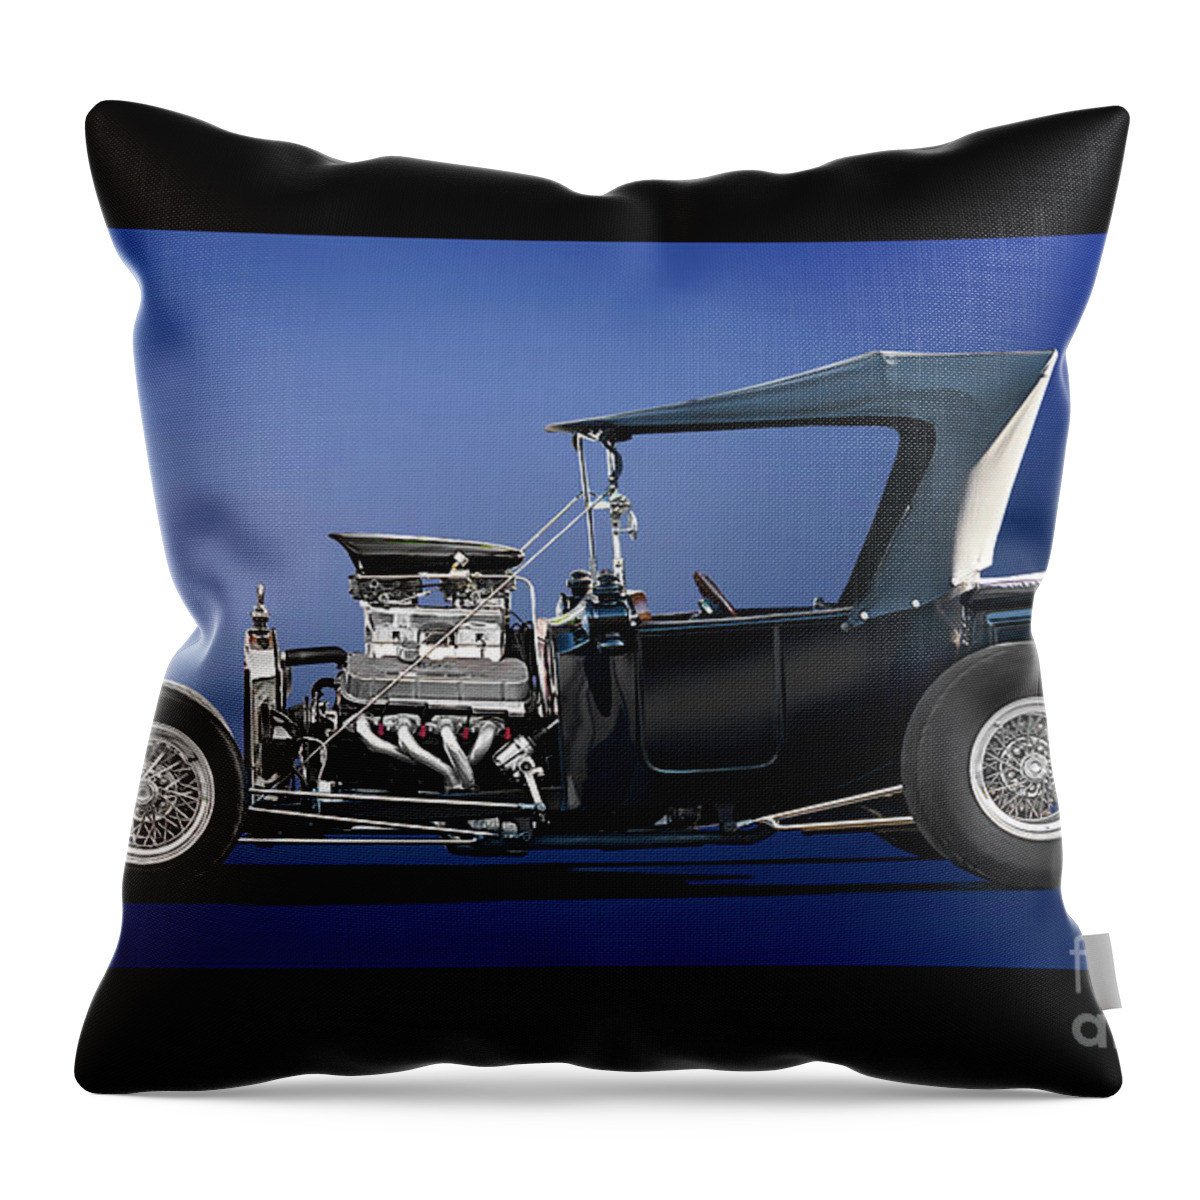 1923 Ford Roadster Pickup Throw Pillow featuring the photograph 1923 Ford Roadster Pickup by Dave Koontz